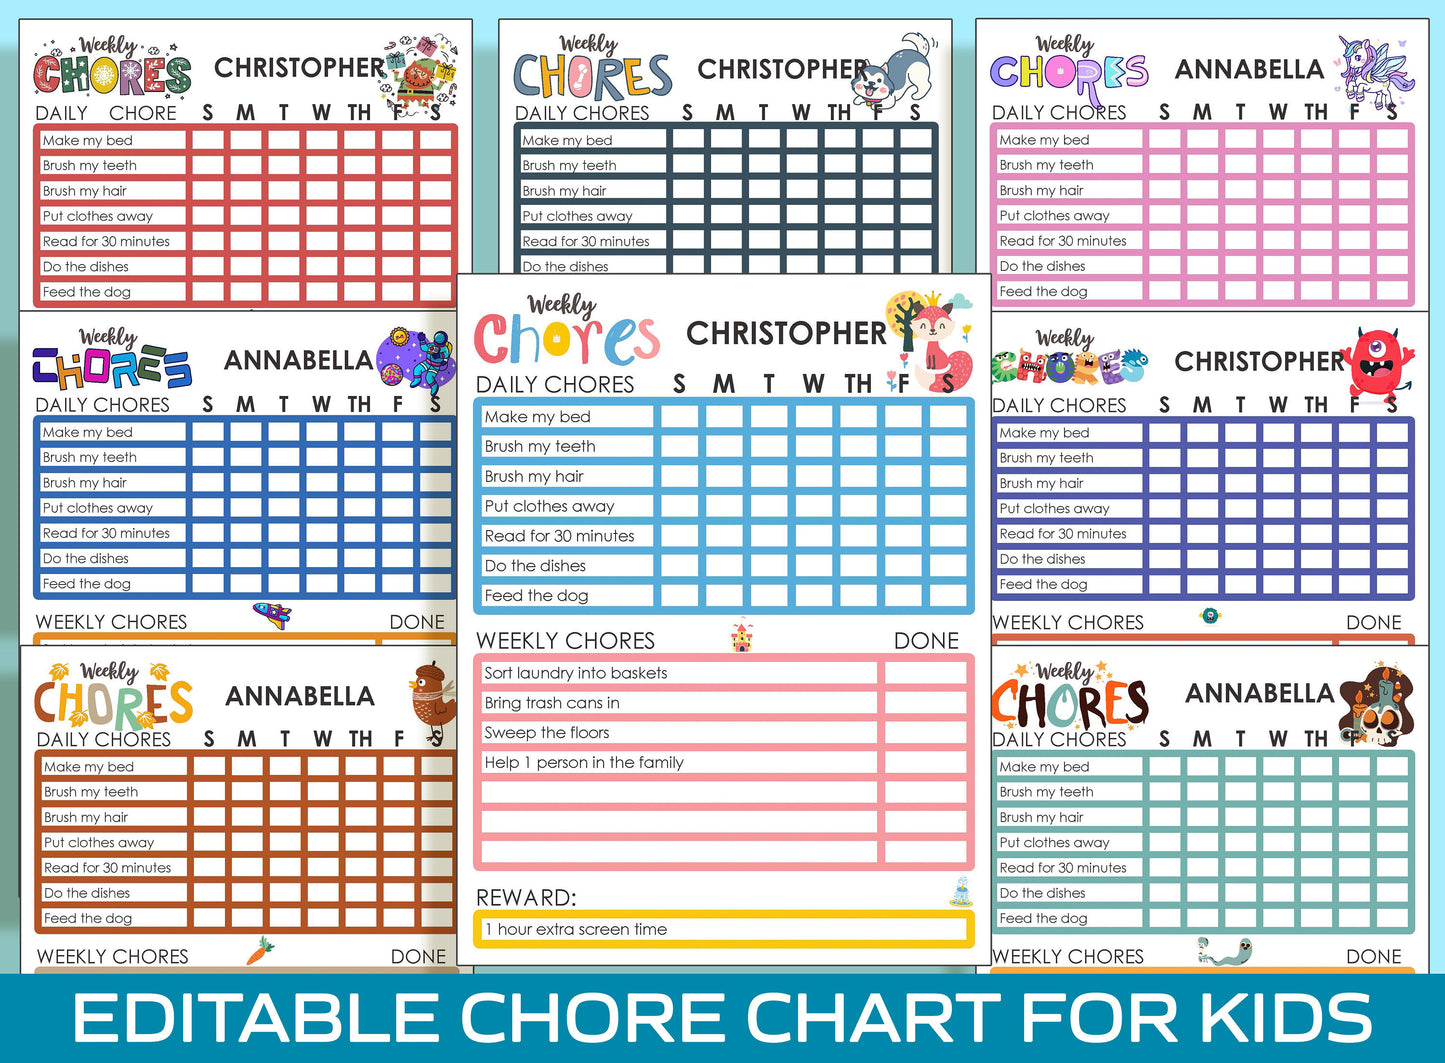 Fun and Easy Chore Charts for Kids: 8 Adorable Designs for 10 Year Old - Printable and Editable, PDF File, Instant Download